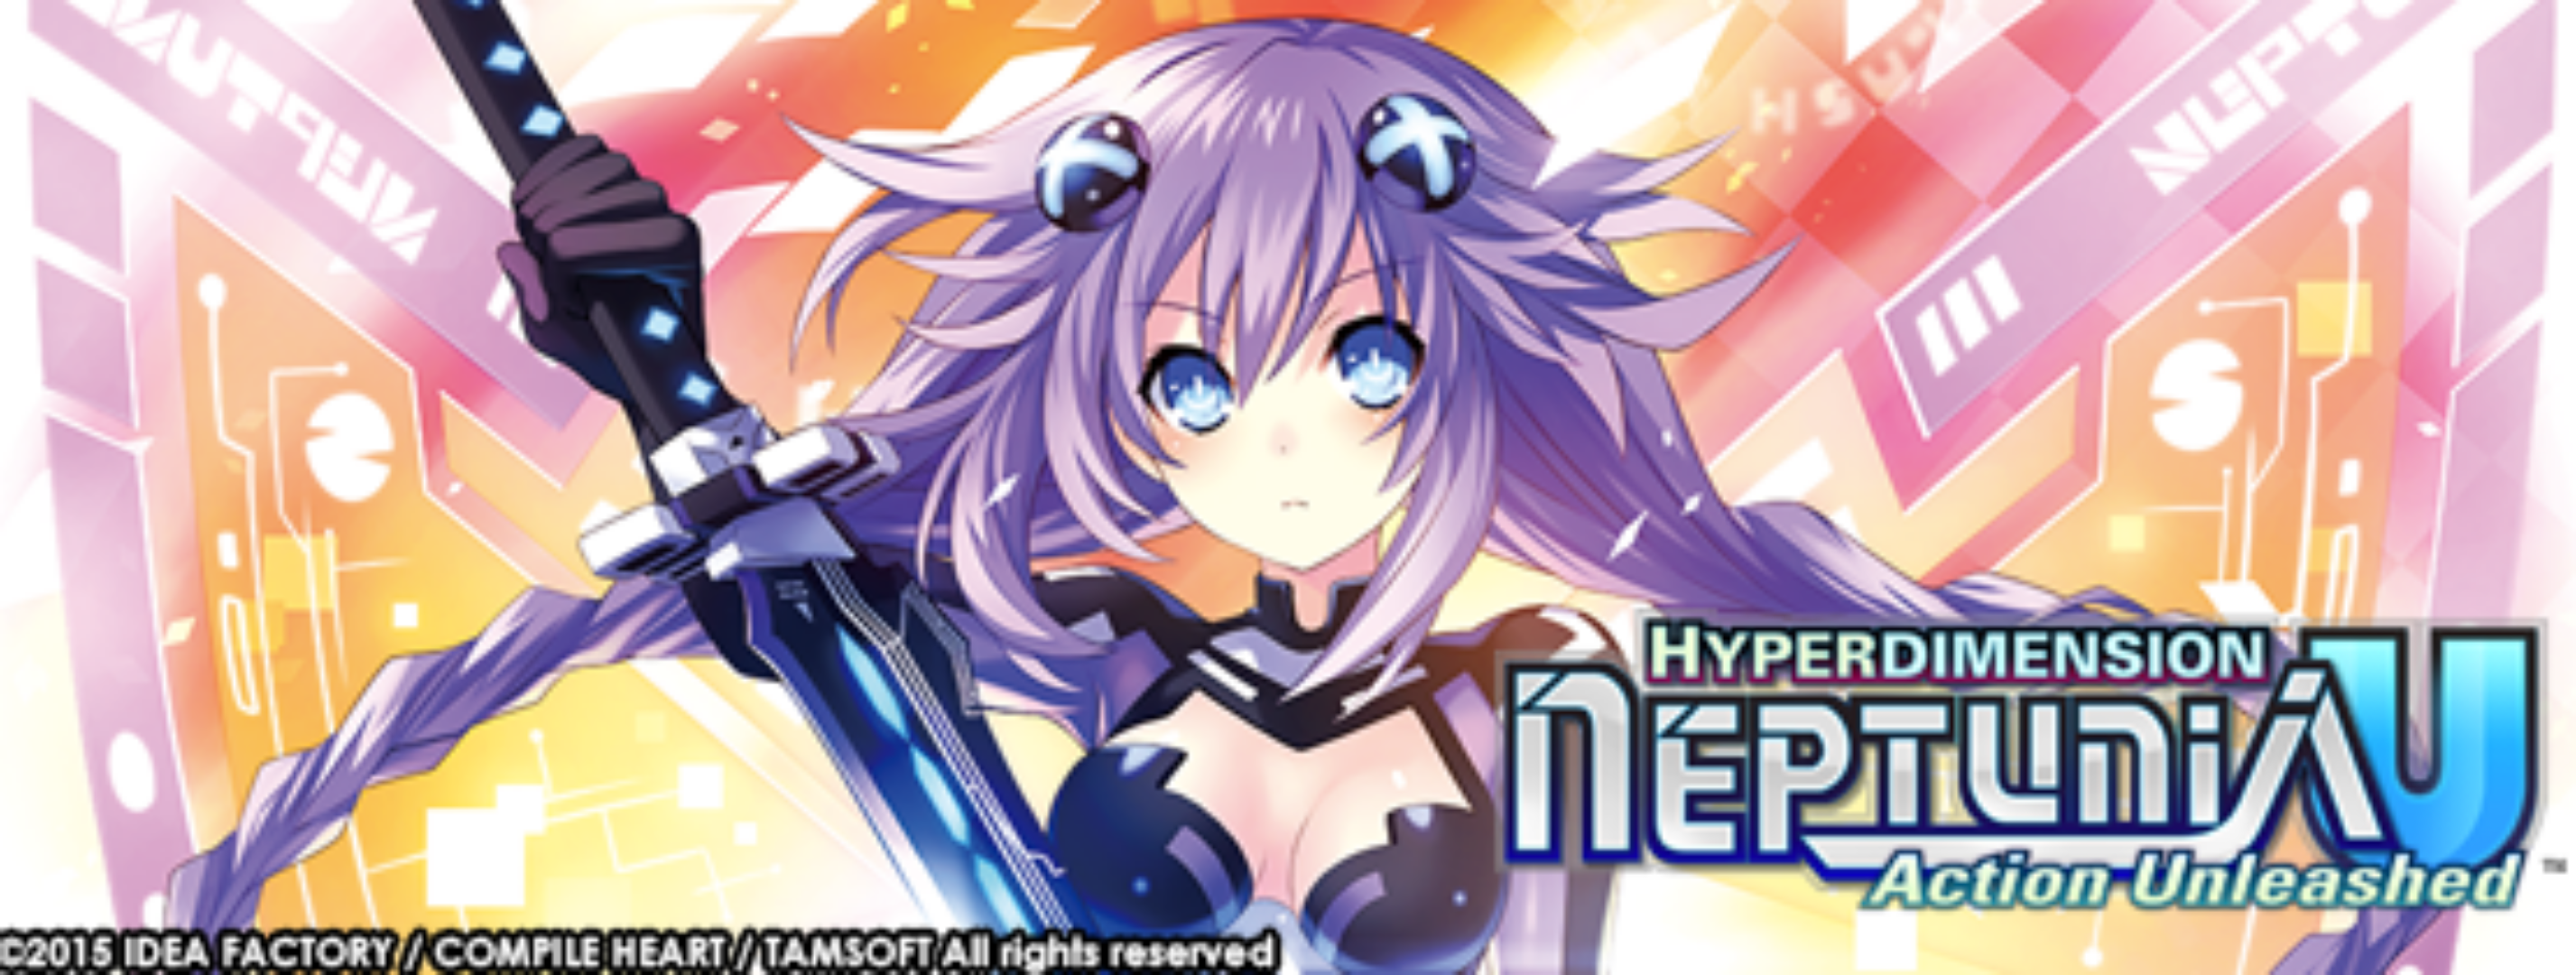 Cover Art and New Screenshots for Hyperdimension Neptunia U: Action Unleashed